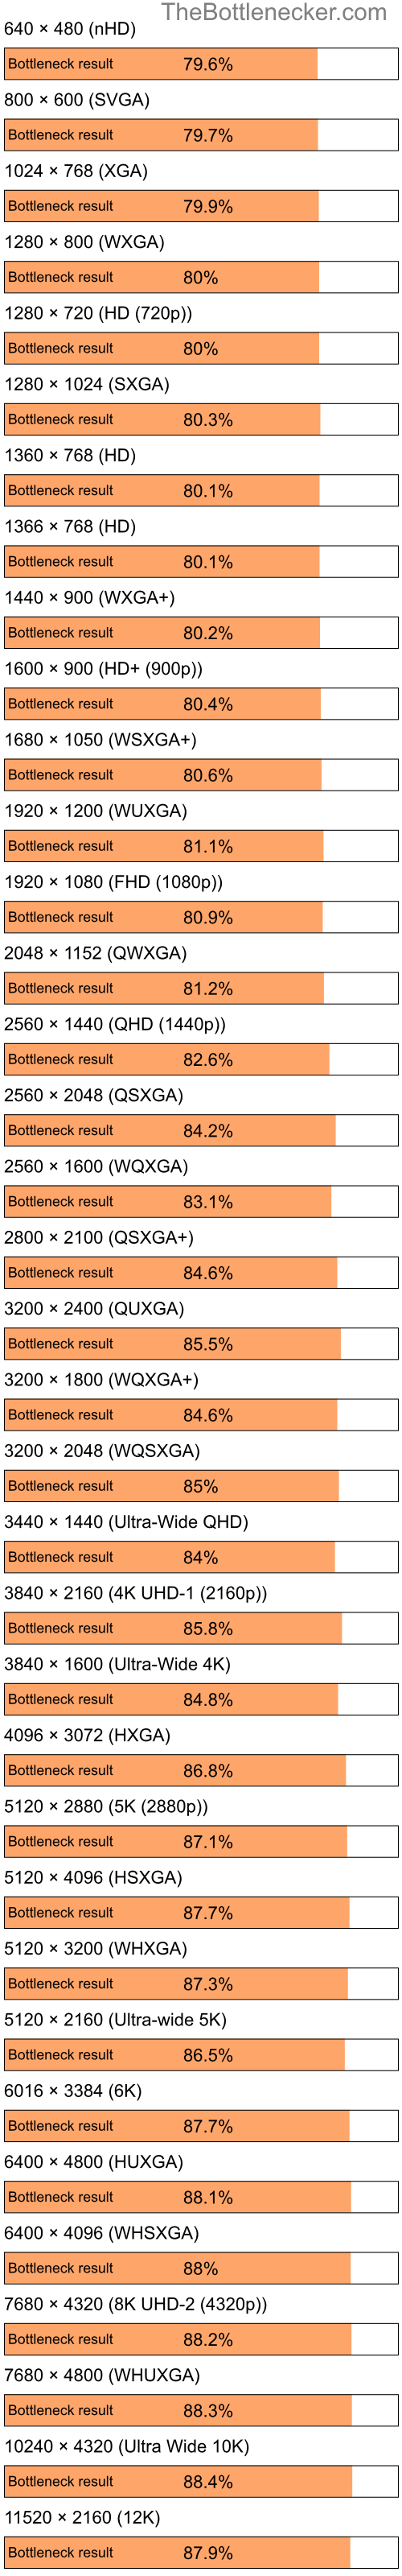 Bottleneck results by resolution for Intel Atom N280 and AMD Radeon X1270 in7 Days to Die